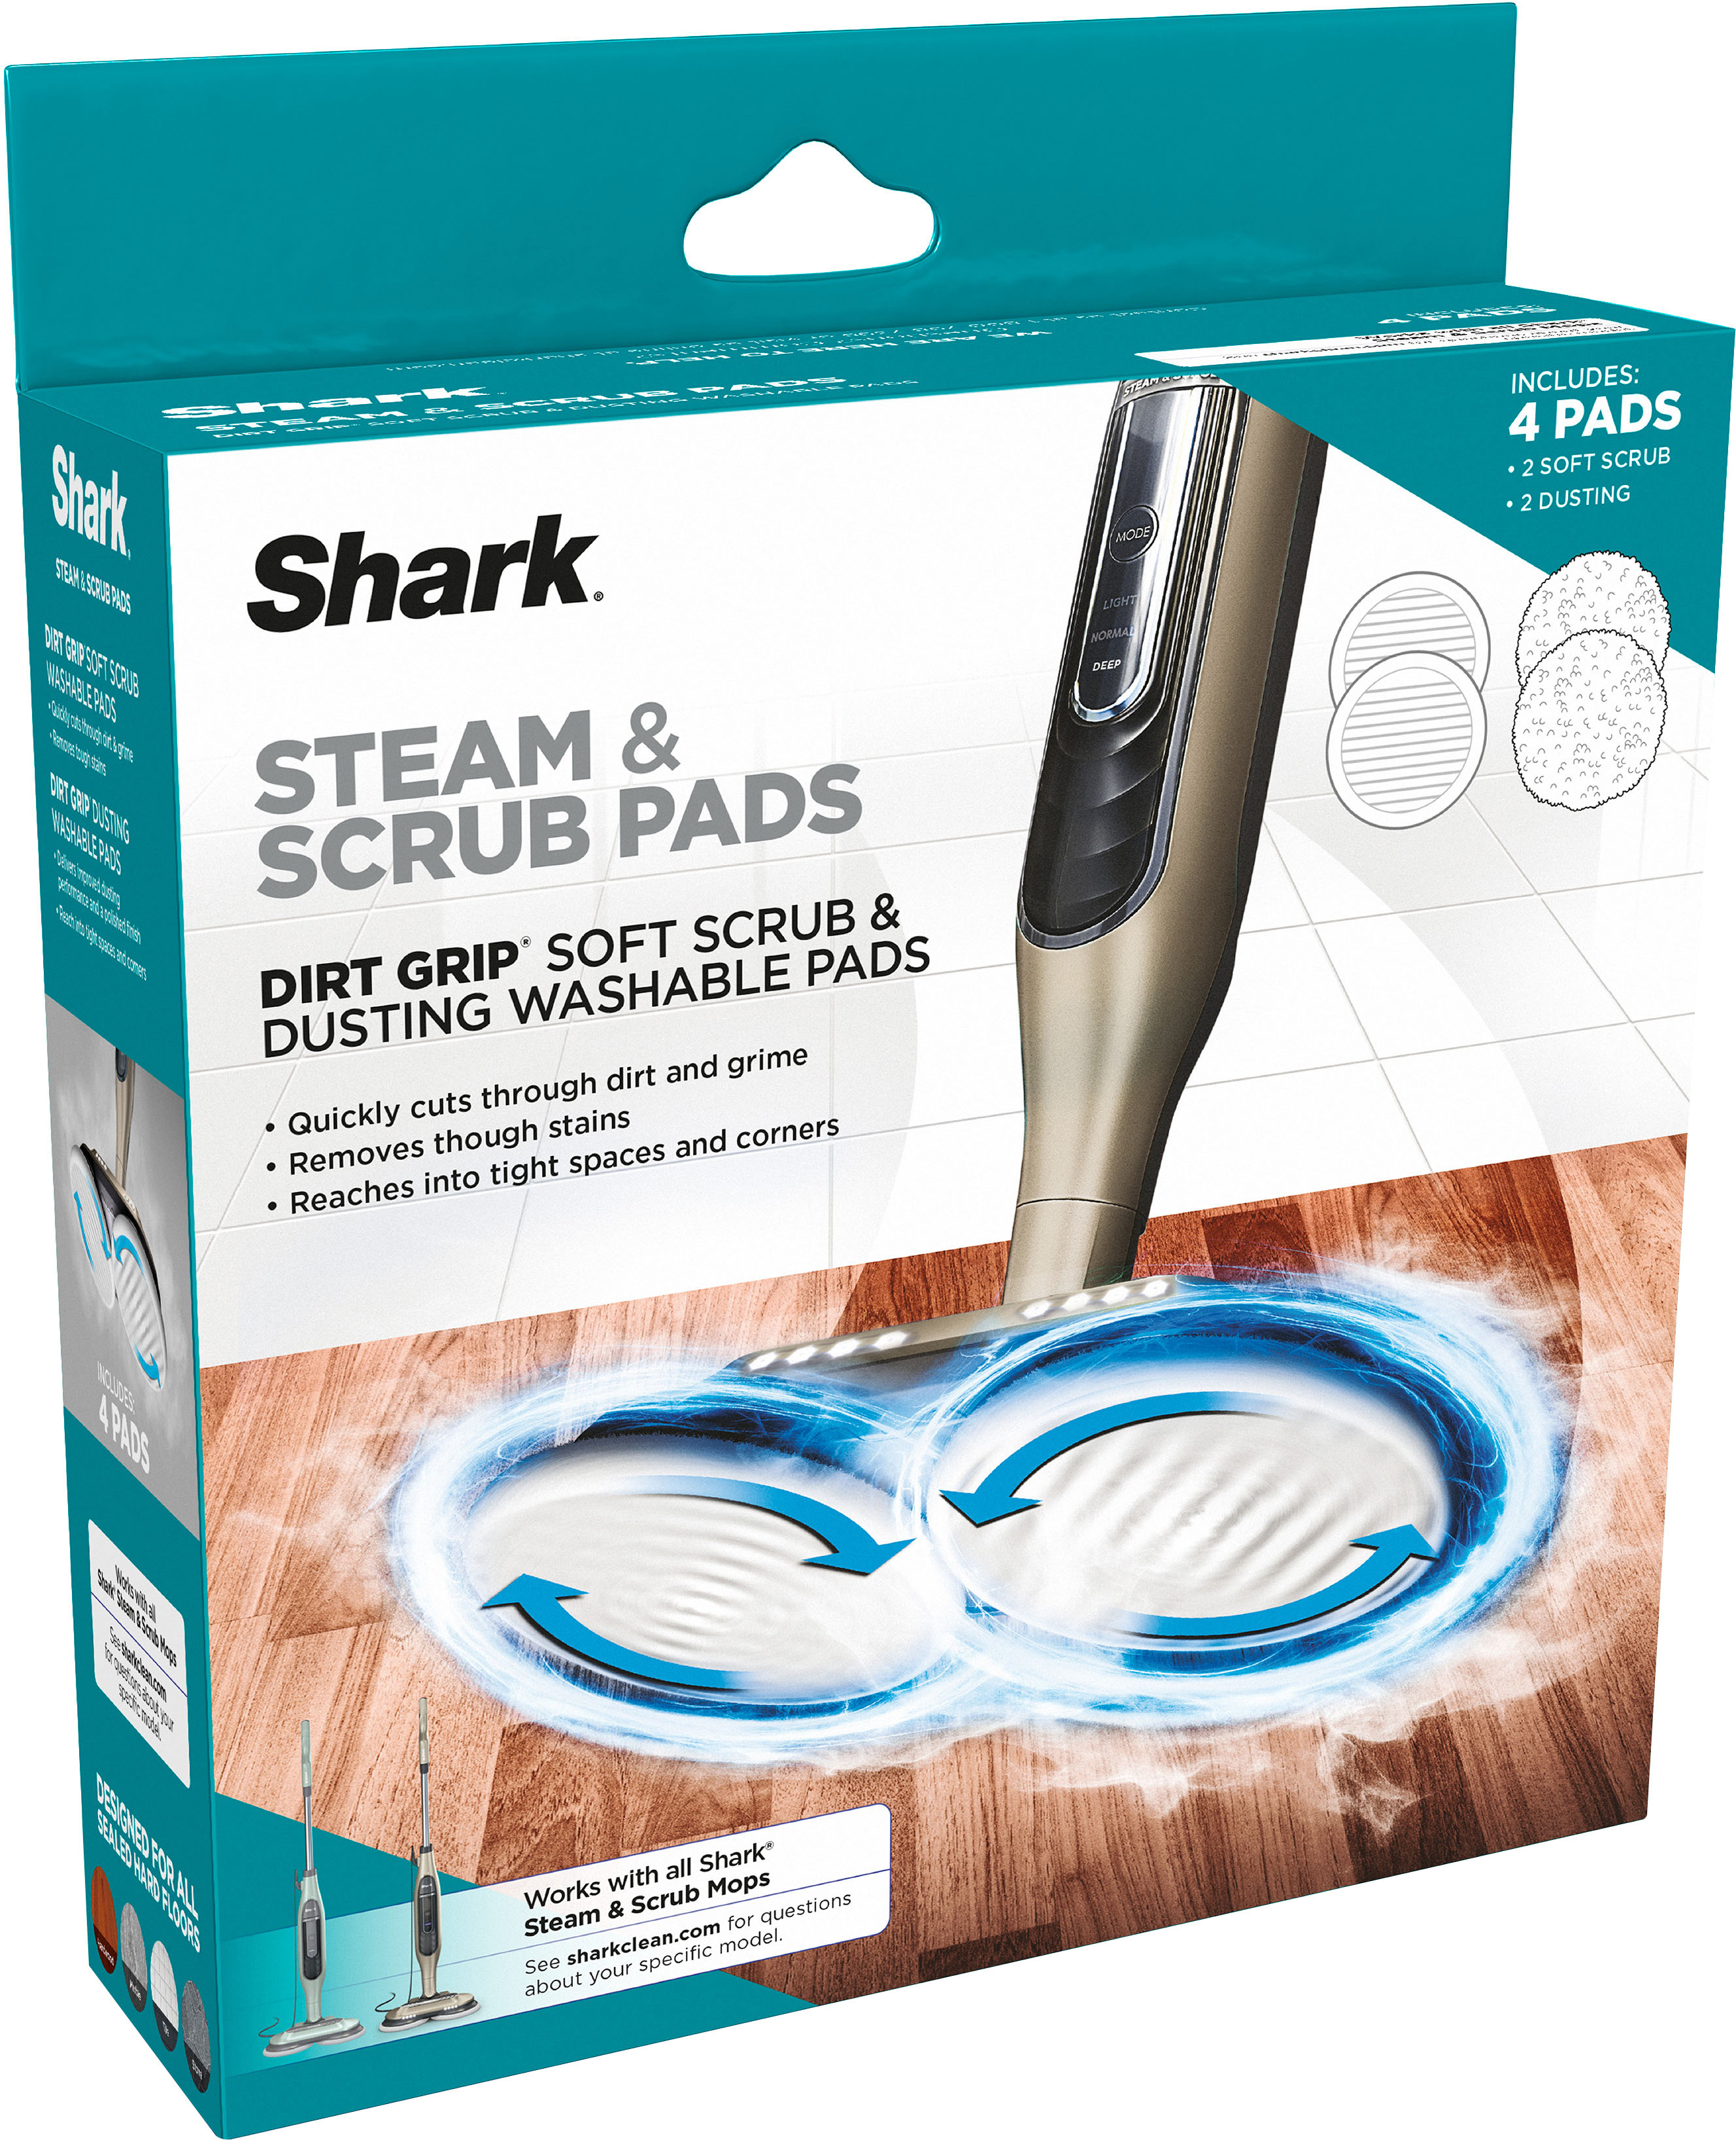 Save $40 on the Shark Steam and Scrub Mop at Walmart